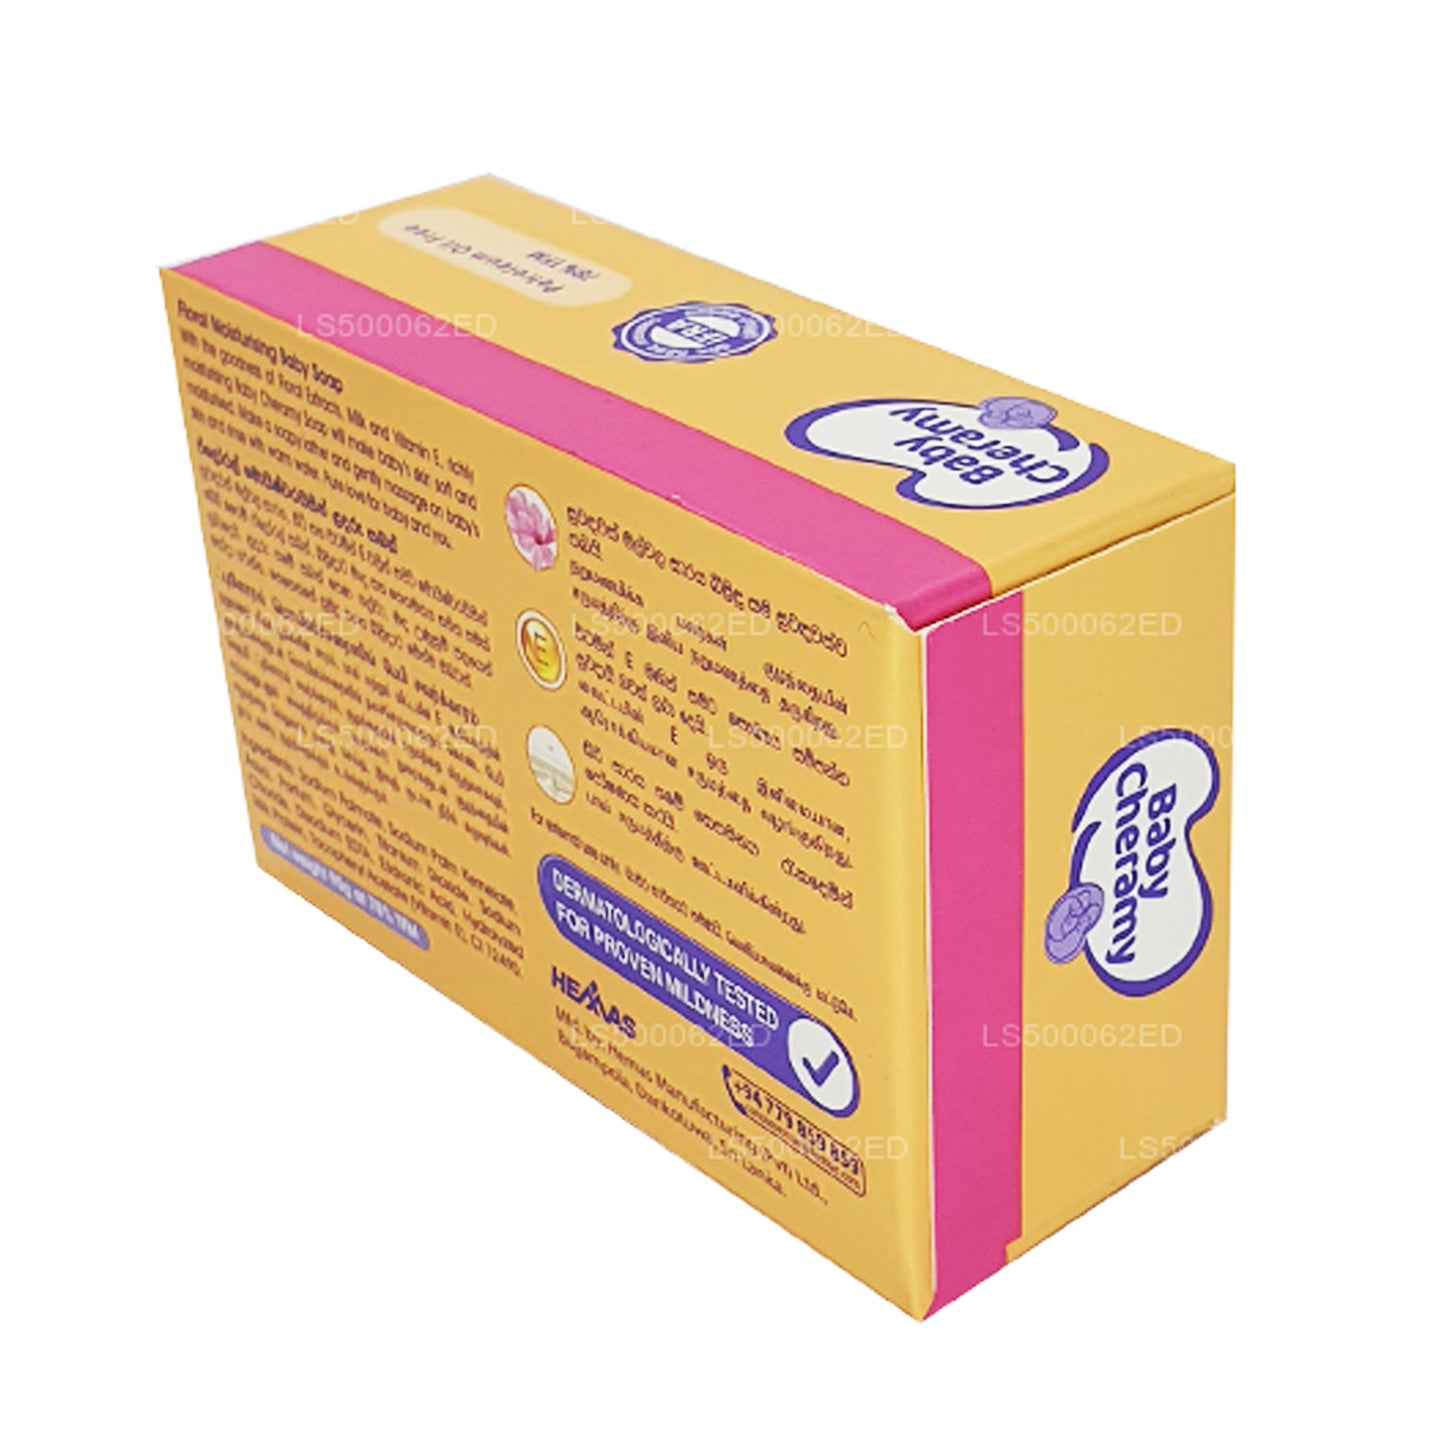 Baby Cheramy Floral Baby Soap (95g)